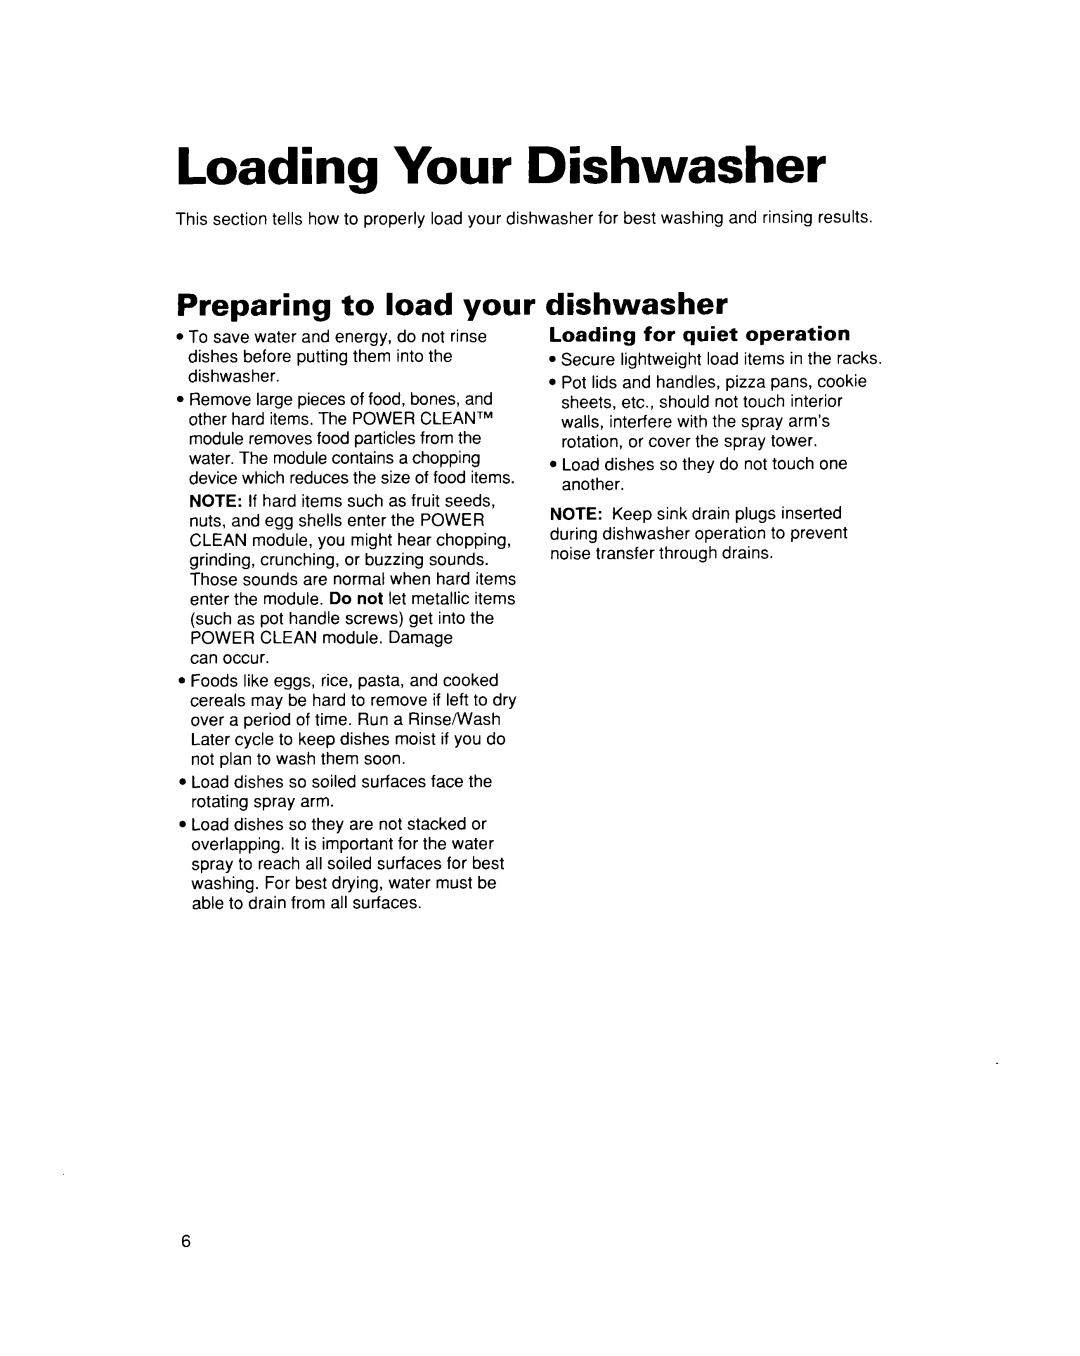 Whirlpool DU930QWD, DU935QWD warranty Loading Your Dishwasher, Preparing to load your, dishwasher 